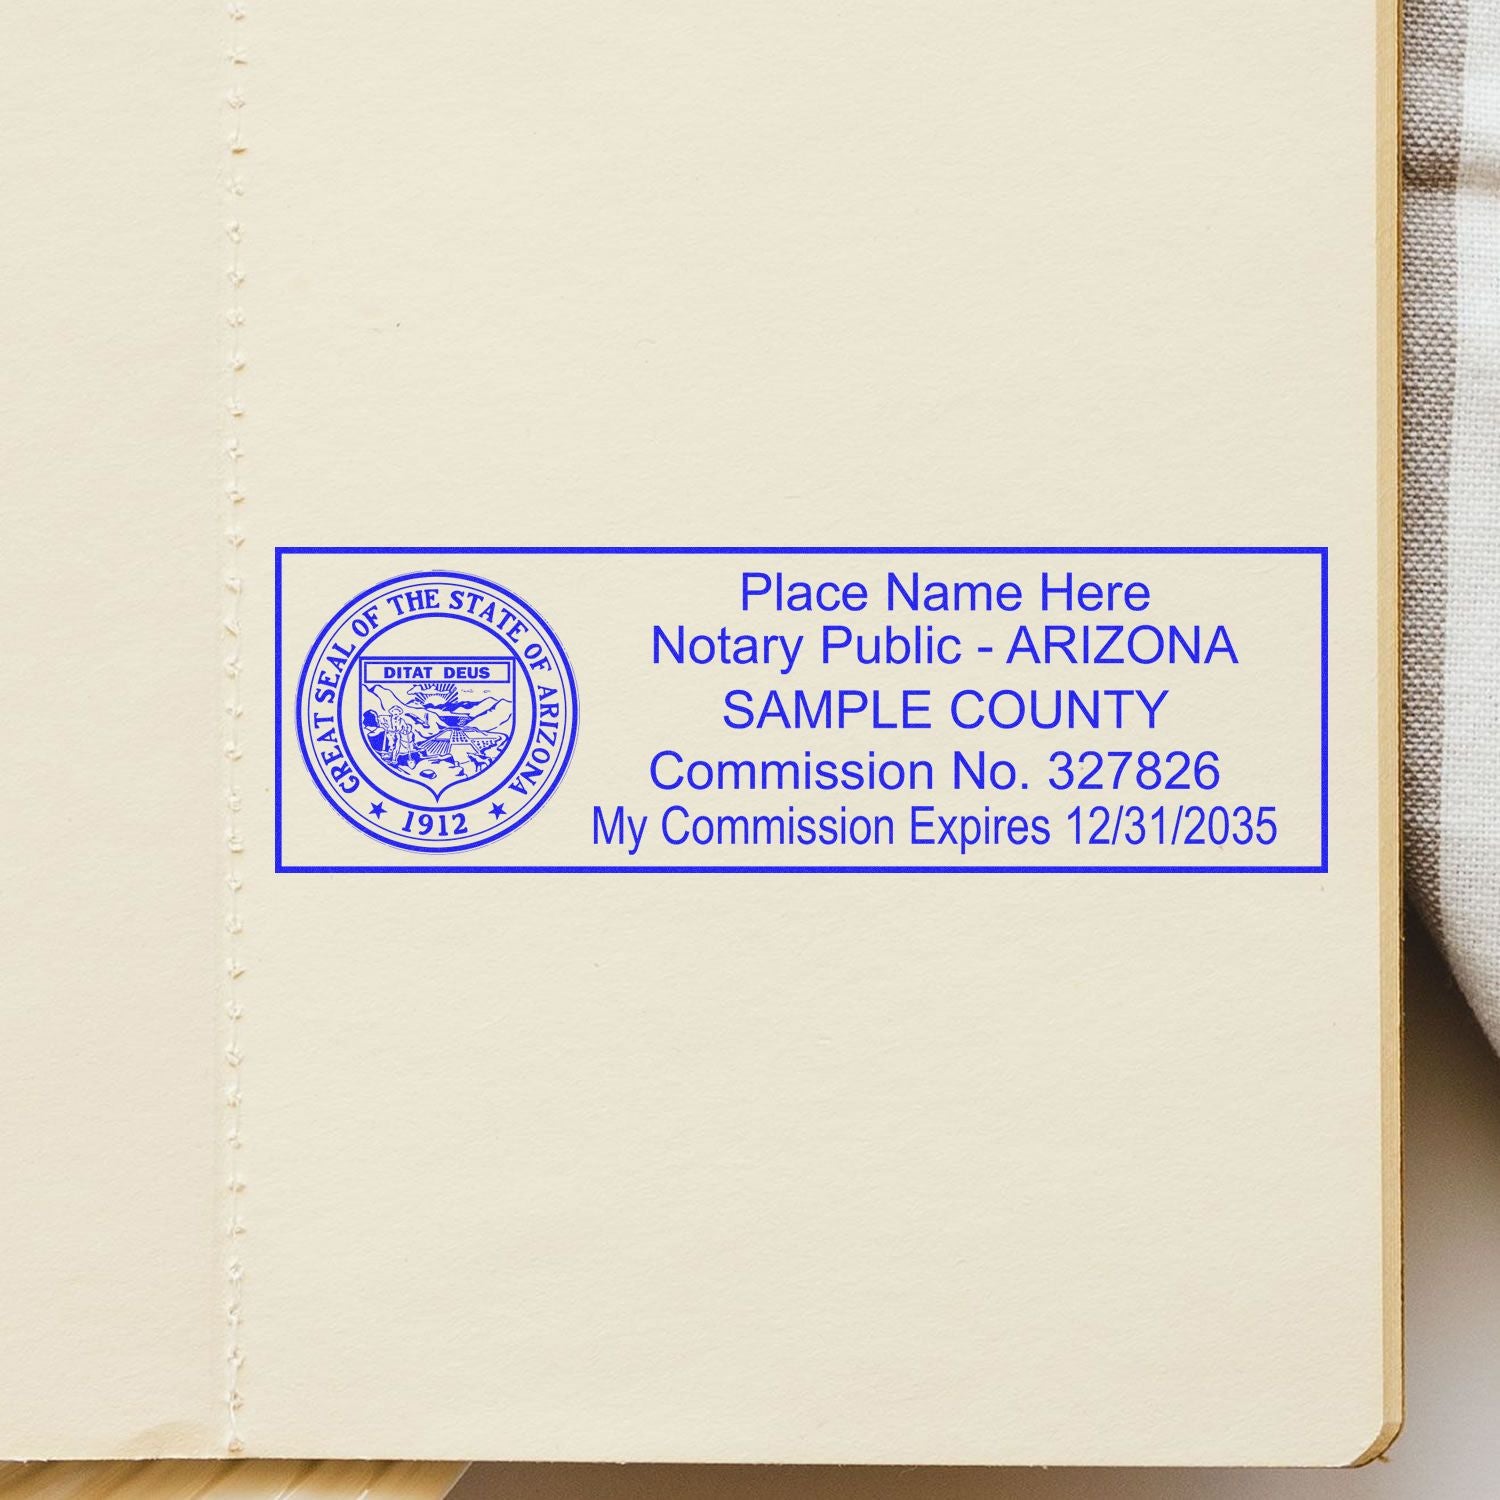 The main image for the Slim Pre-Inked State Seal Notary Stamp for Arizona depicting a sample of the imprint and electronic files